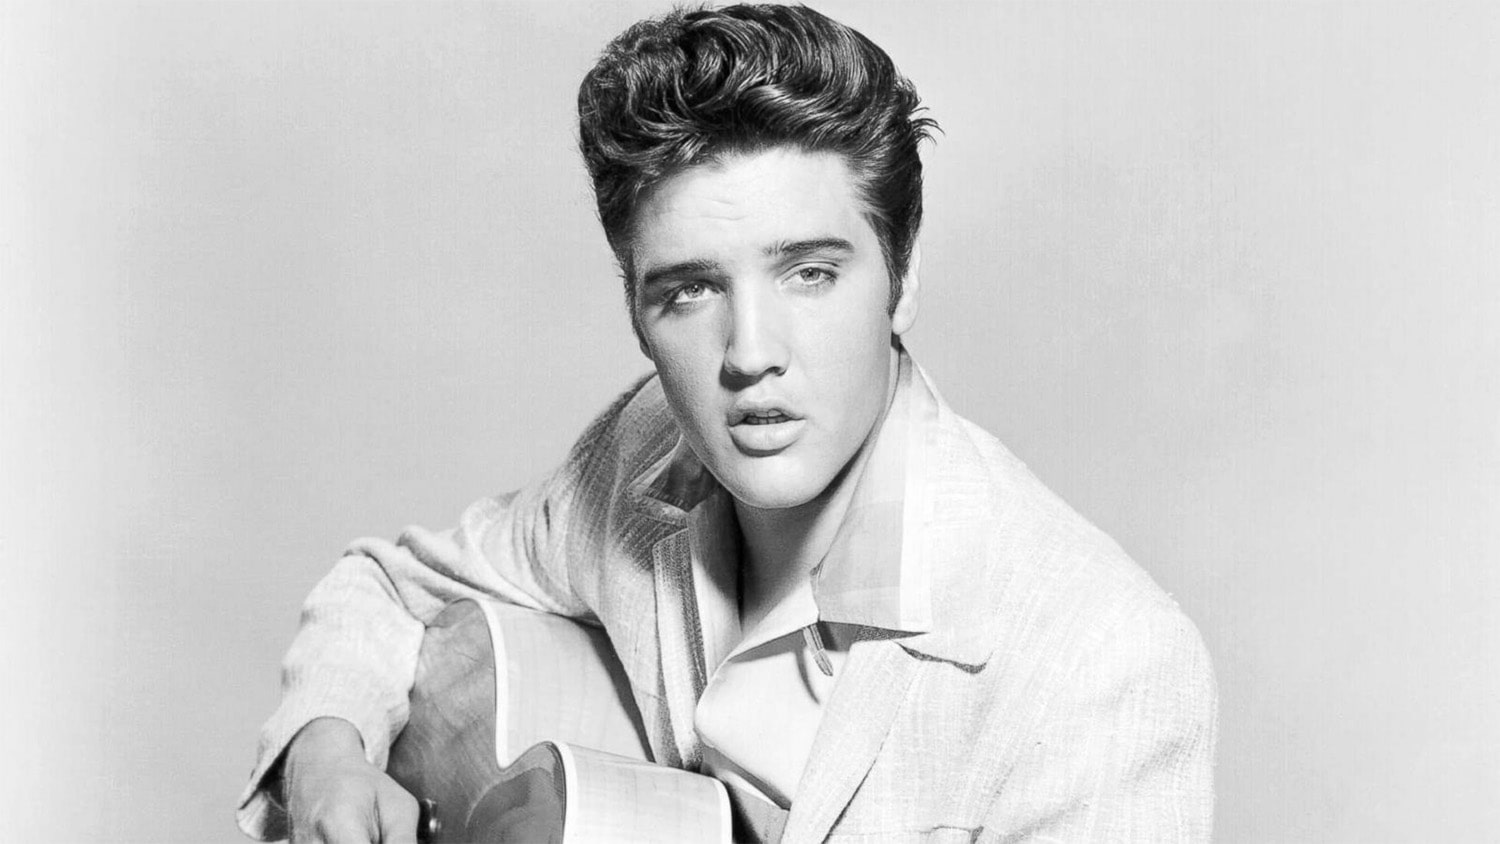 32 interesting facts about Elvis Presley